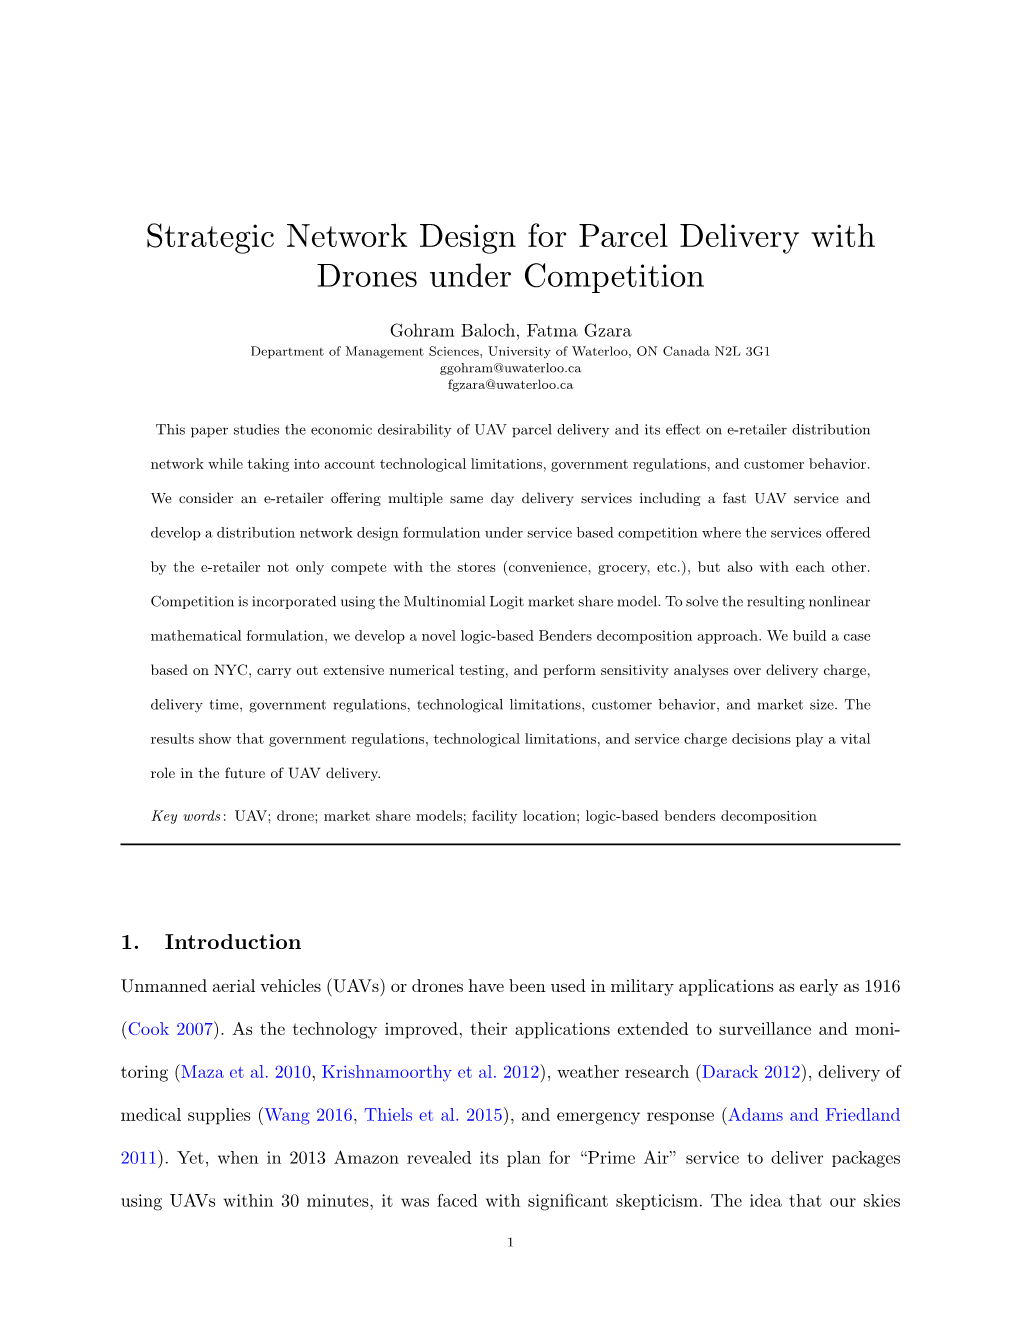 Strategic Network Design for Parcel Delivery with Drones Under Competition